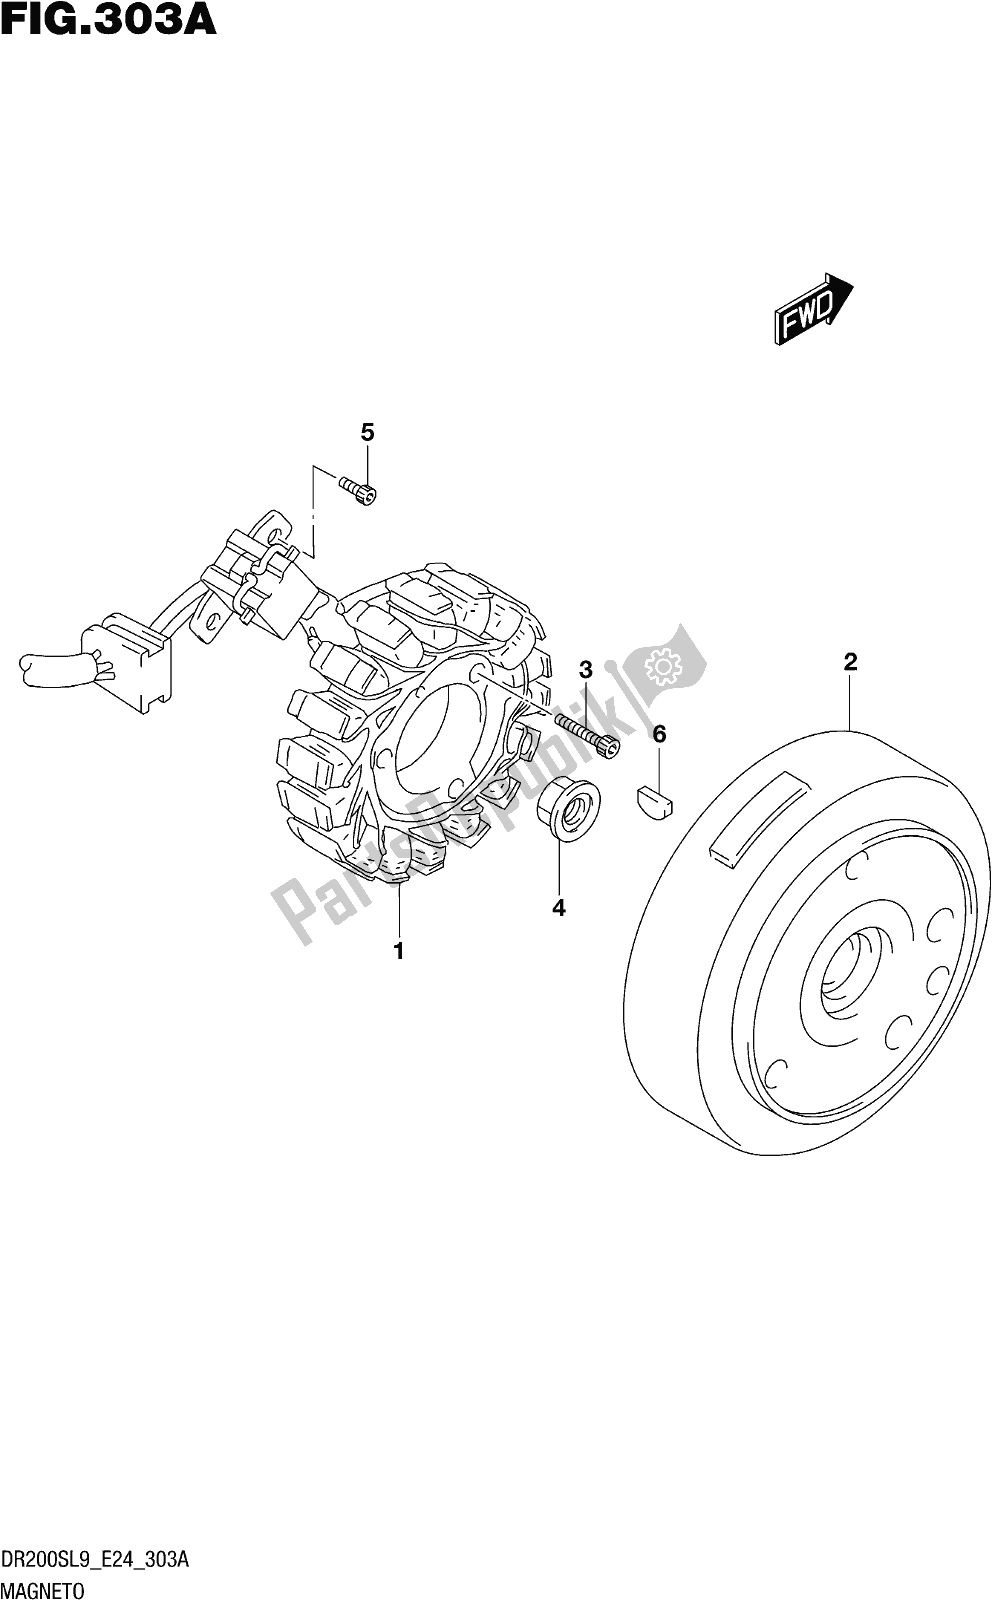 All parts for the Fig. 303a Magneto of the Suzuki DR 200S 2019